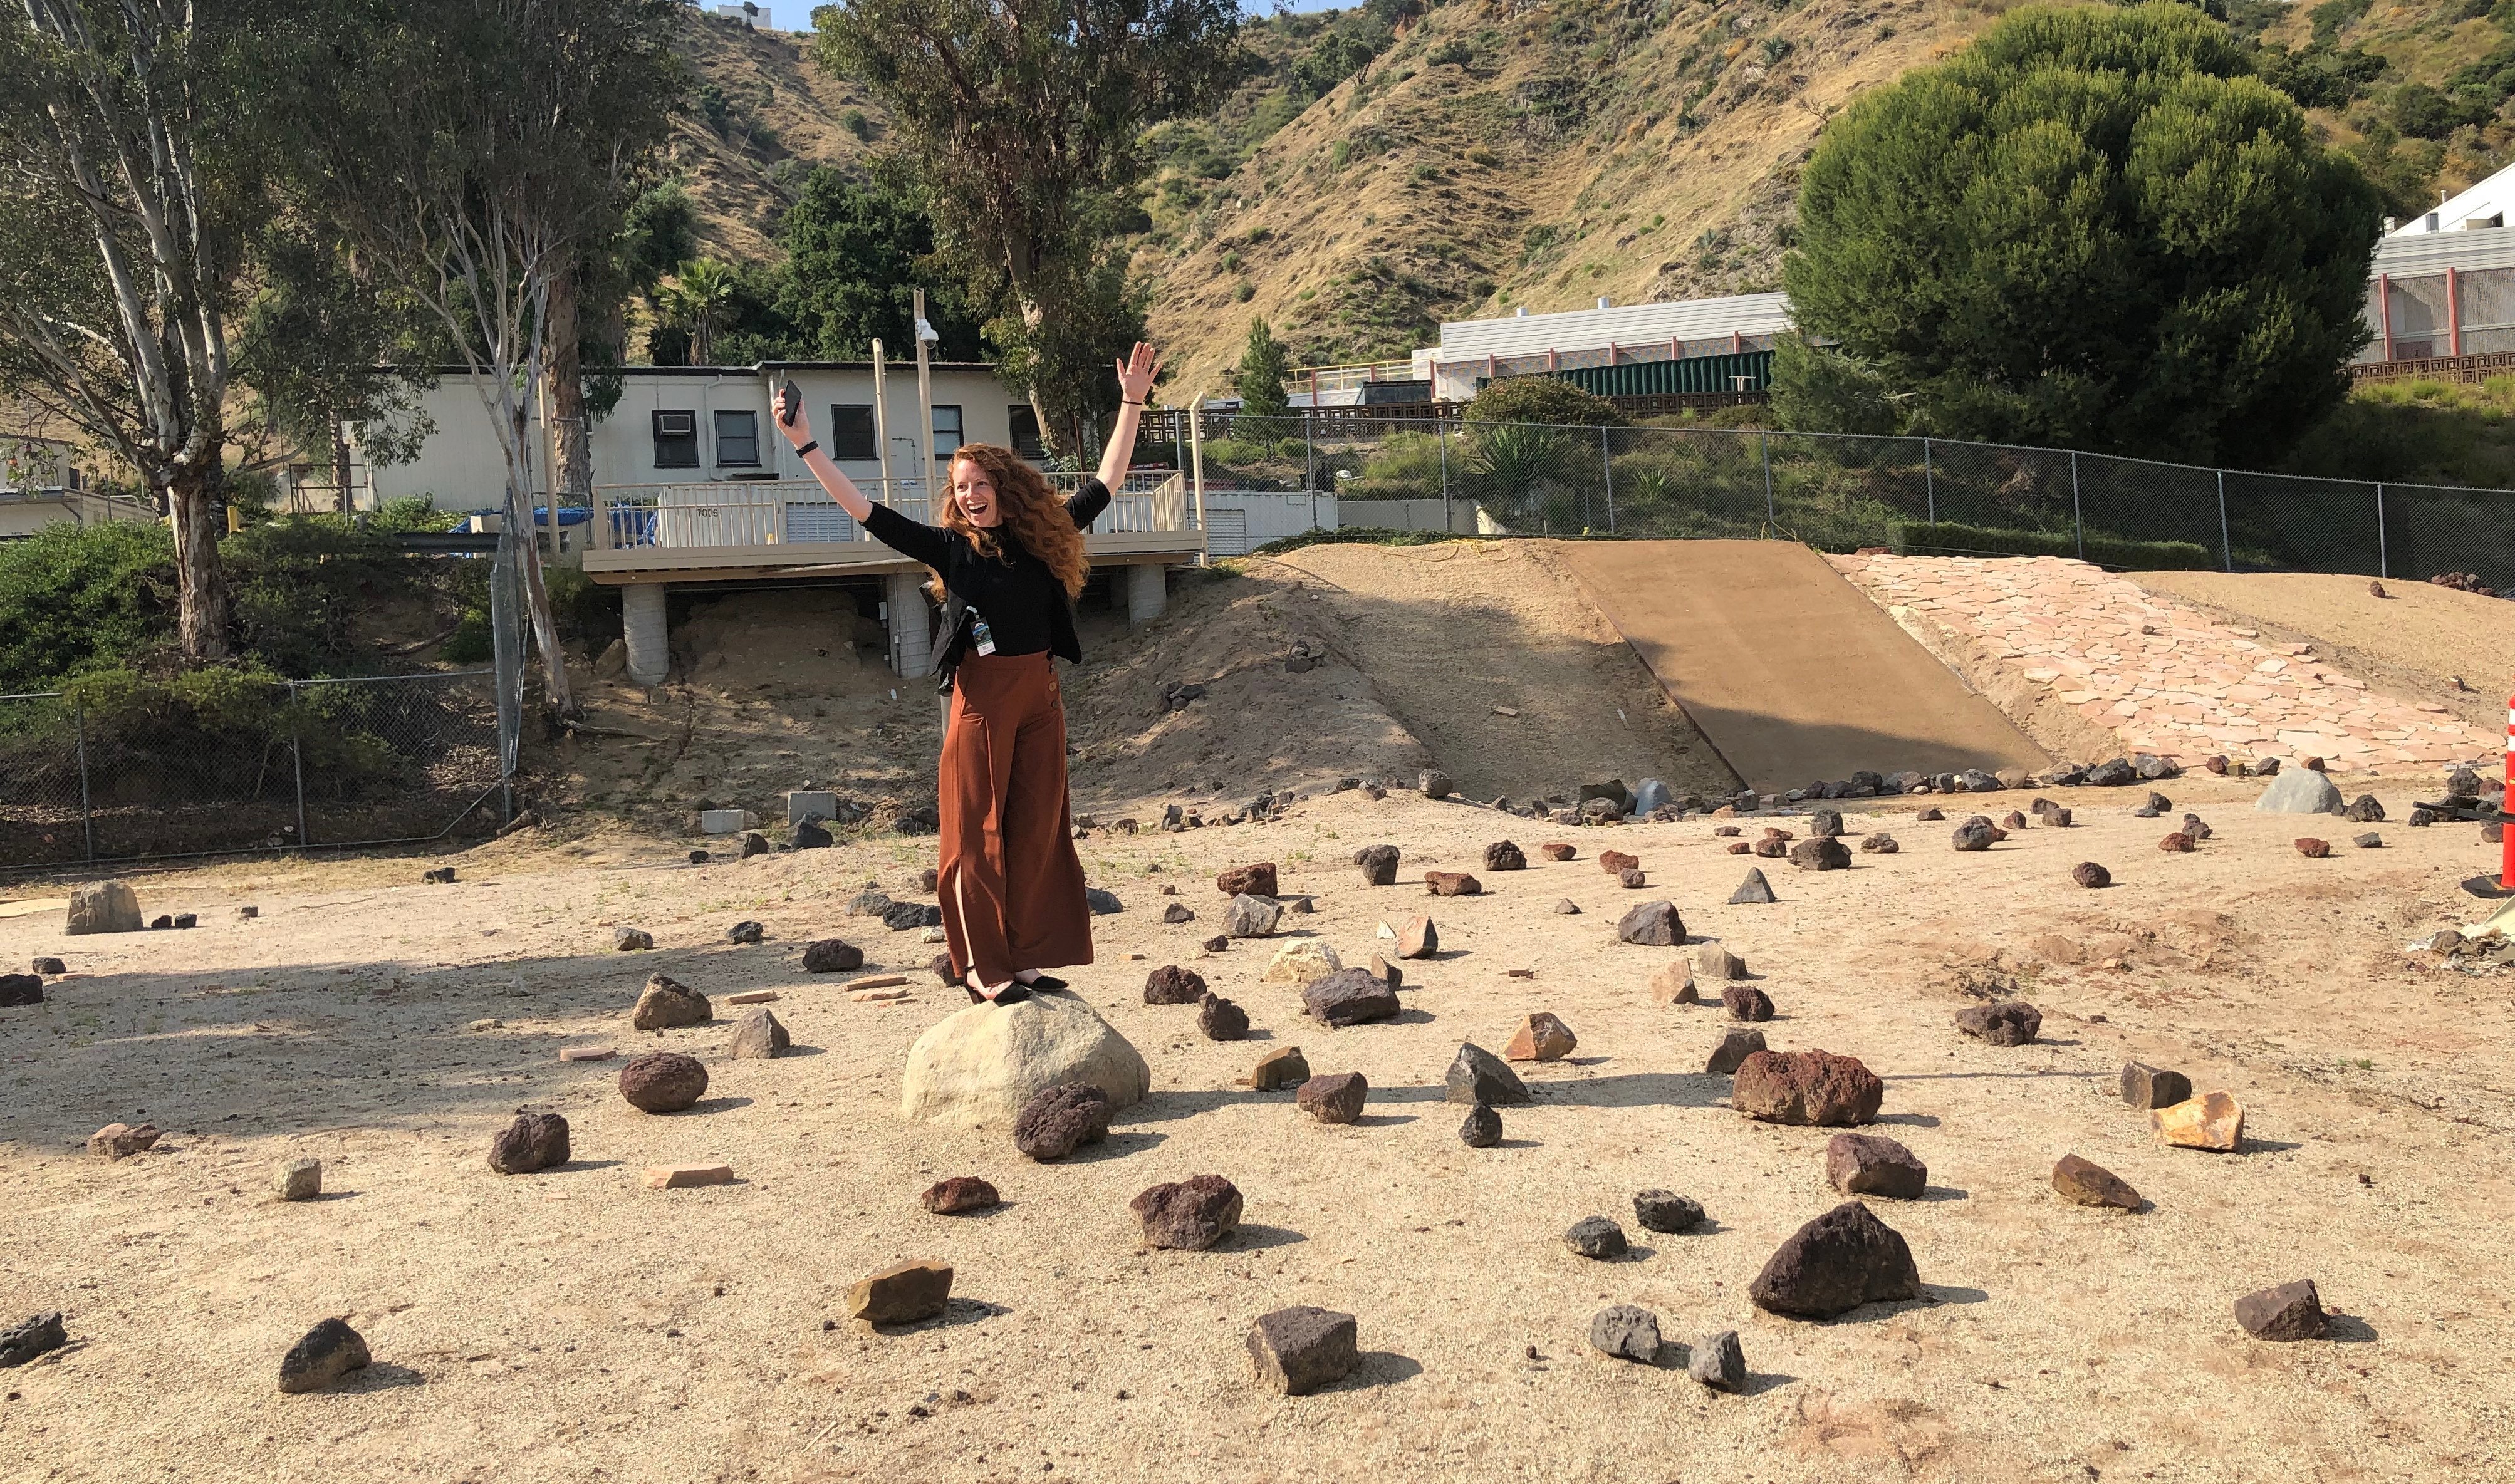 Woman standing on a rock in JPL's Mars yard rover testing location.